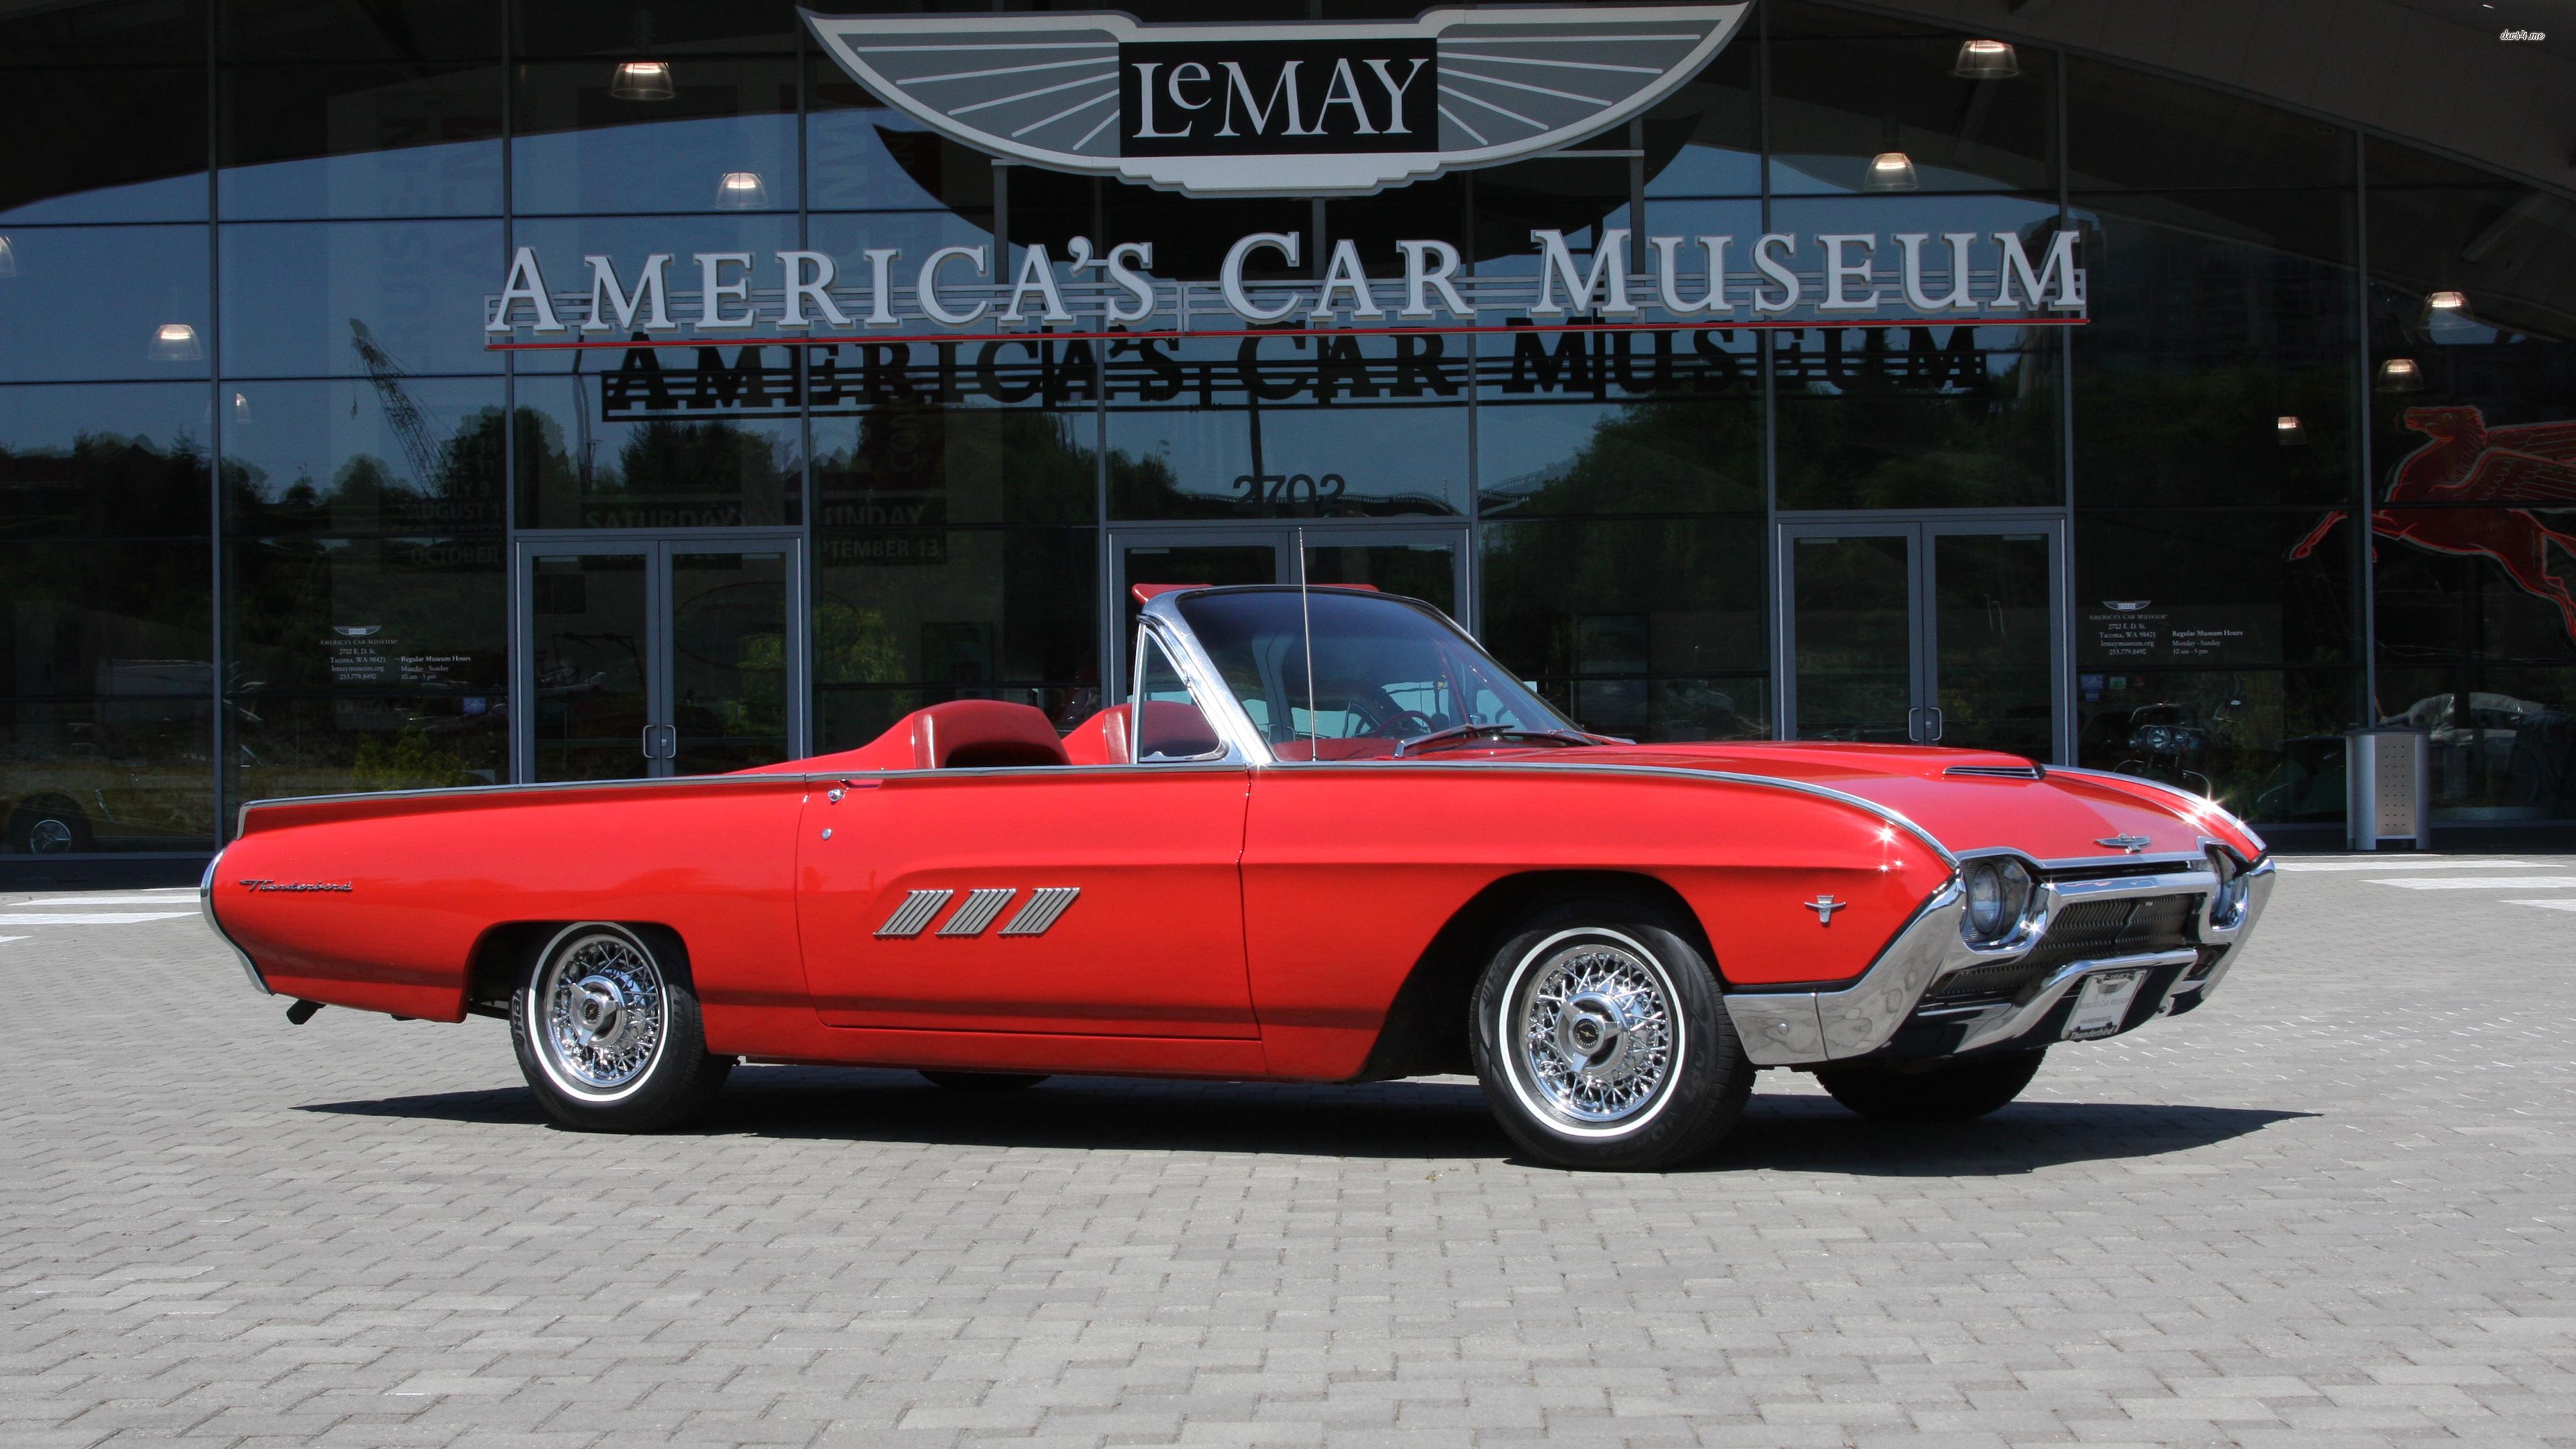 Red Ford Thunderbird in front of a car museum wallpaper